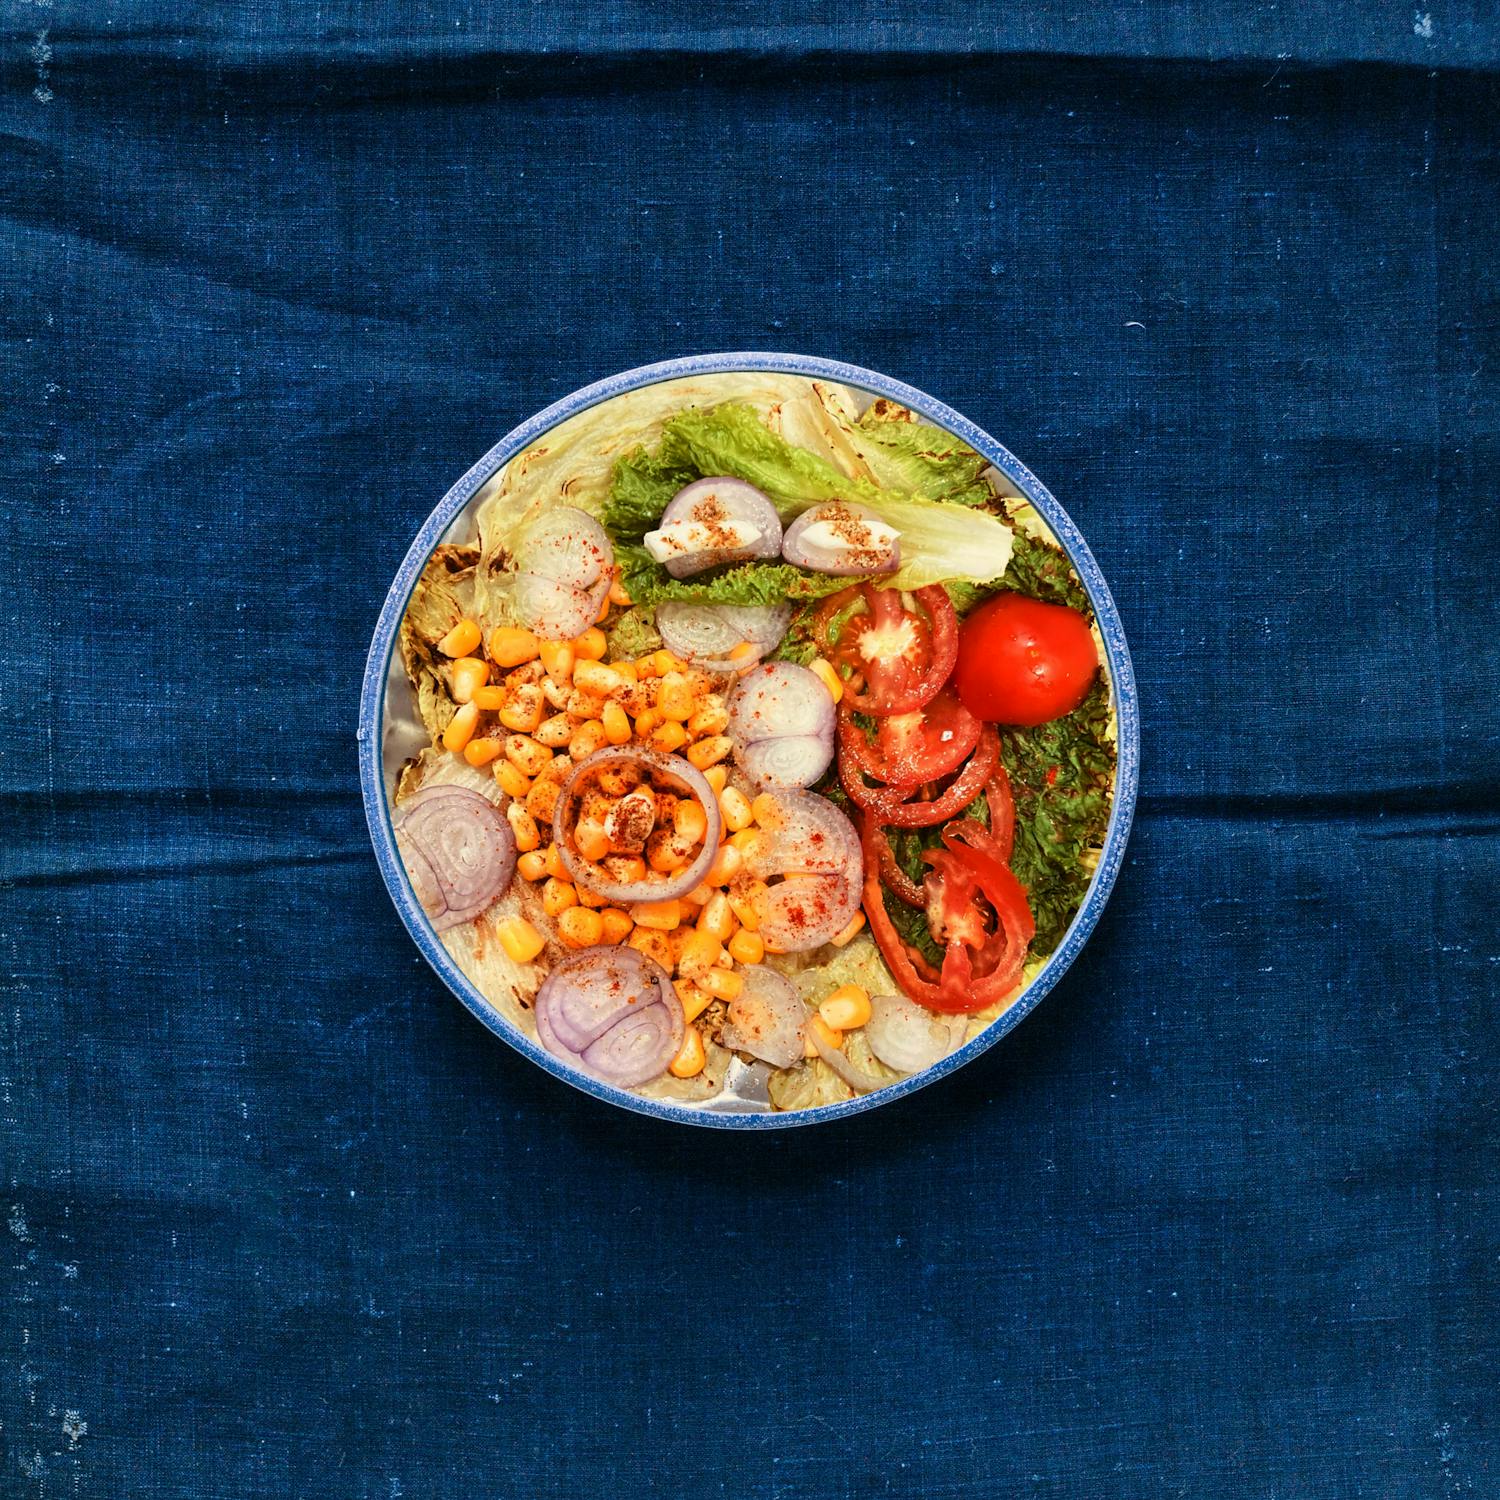 Hawaiian vegetable bowl on a blue wooden surface